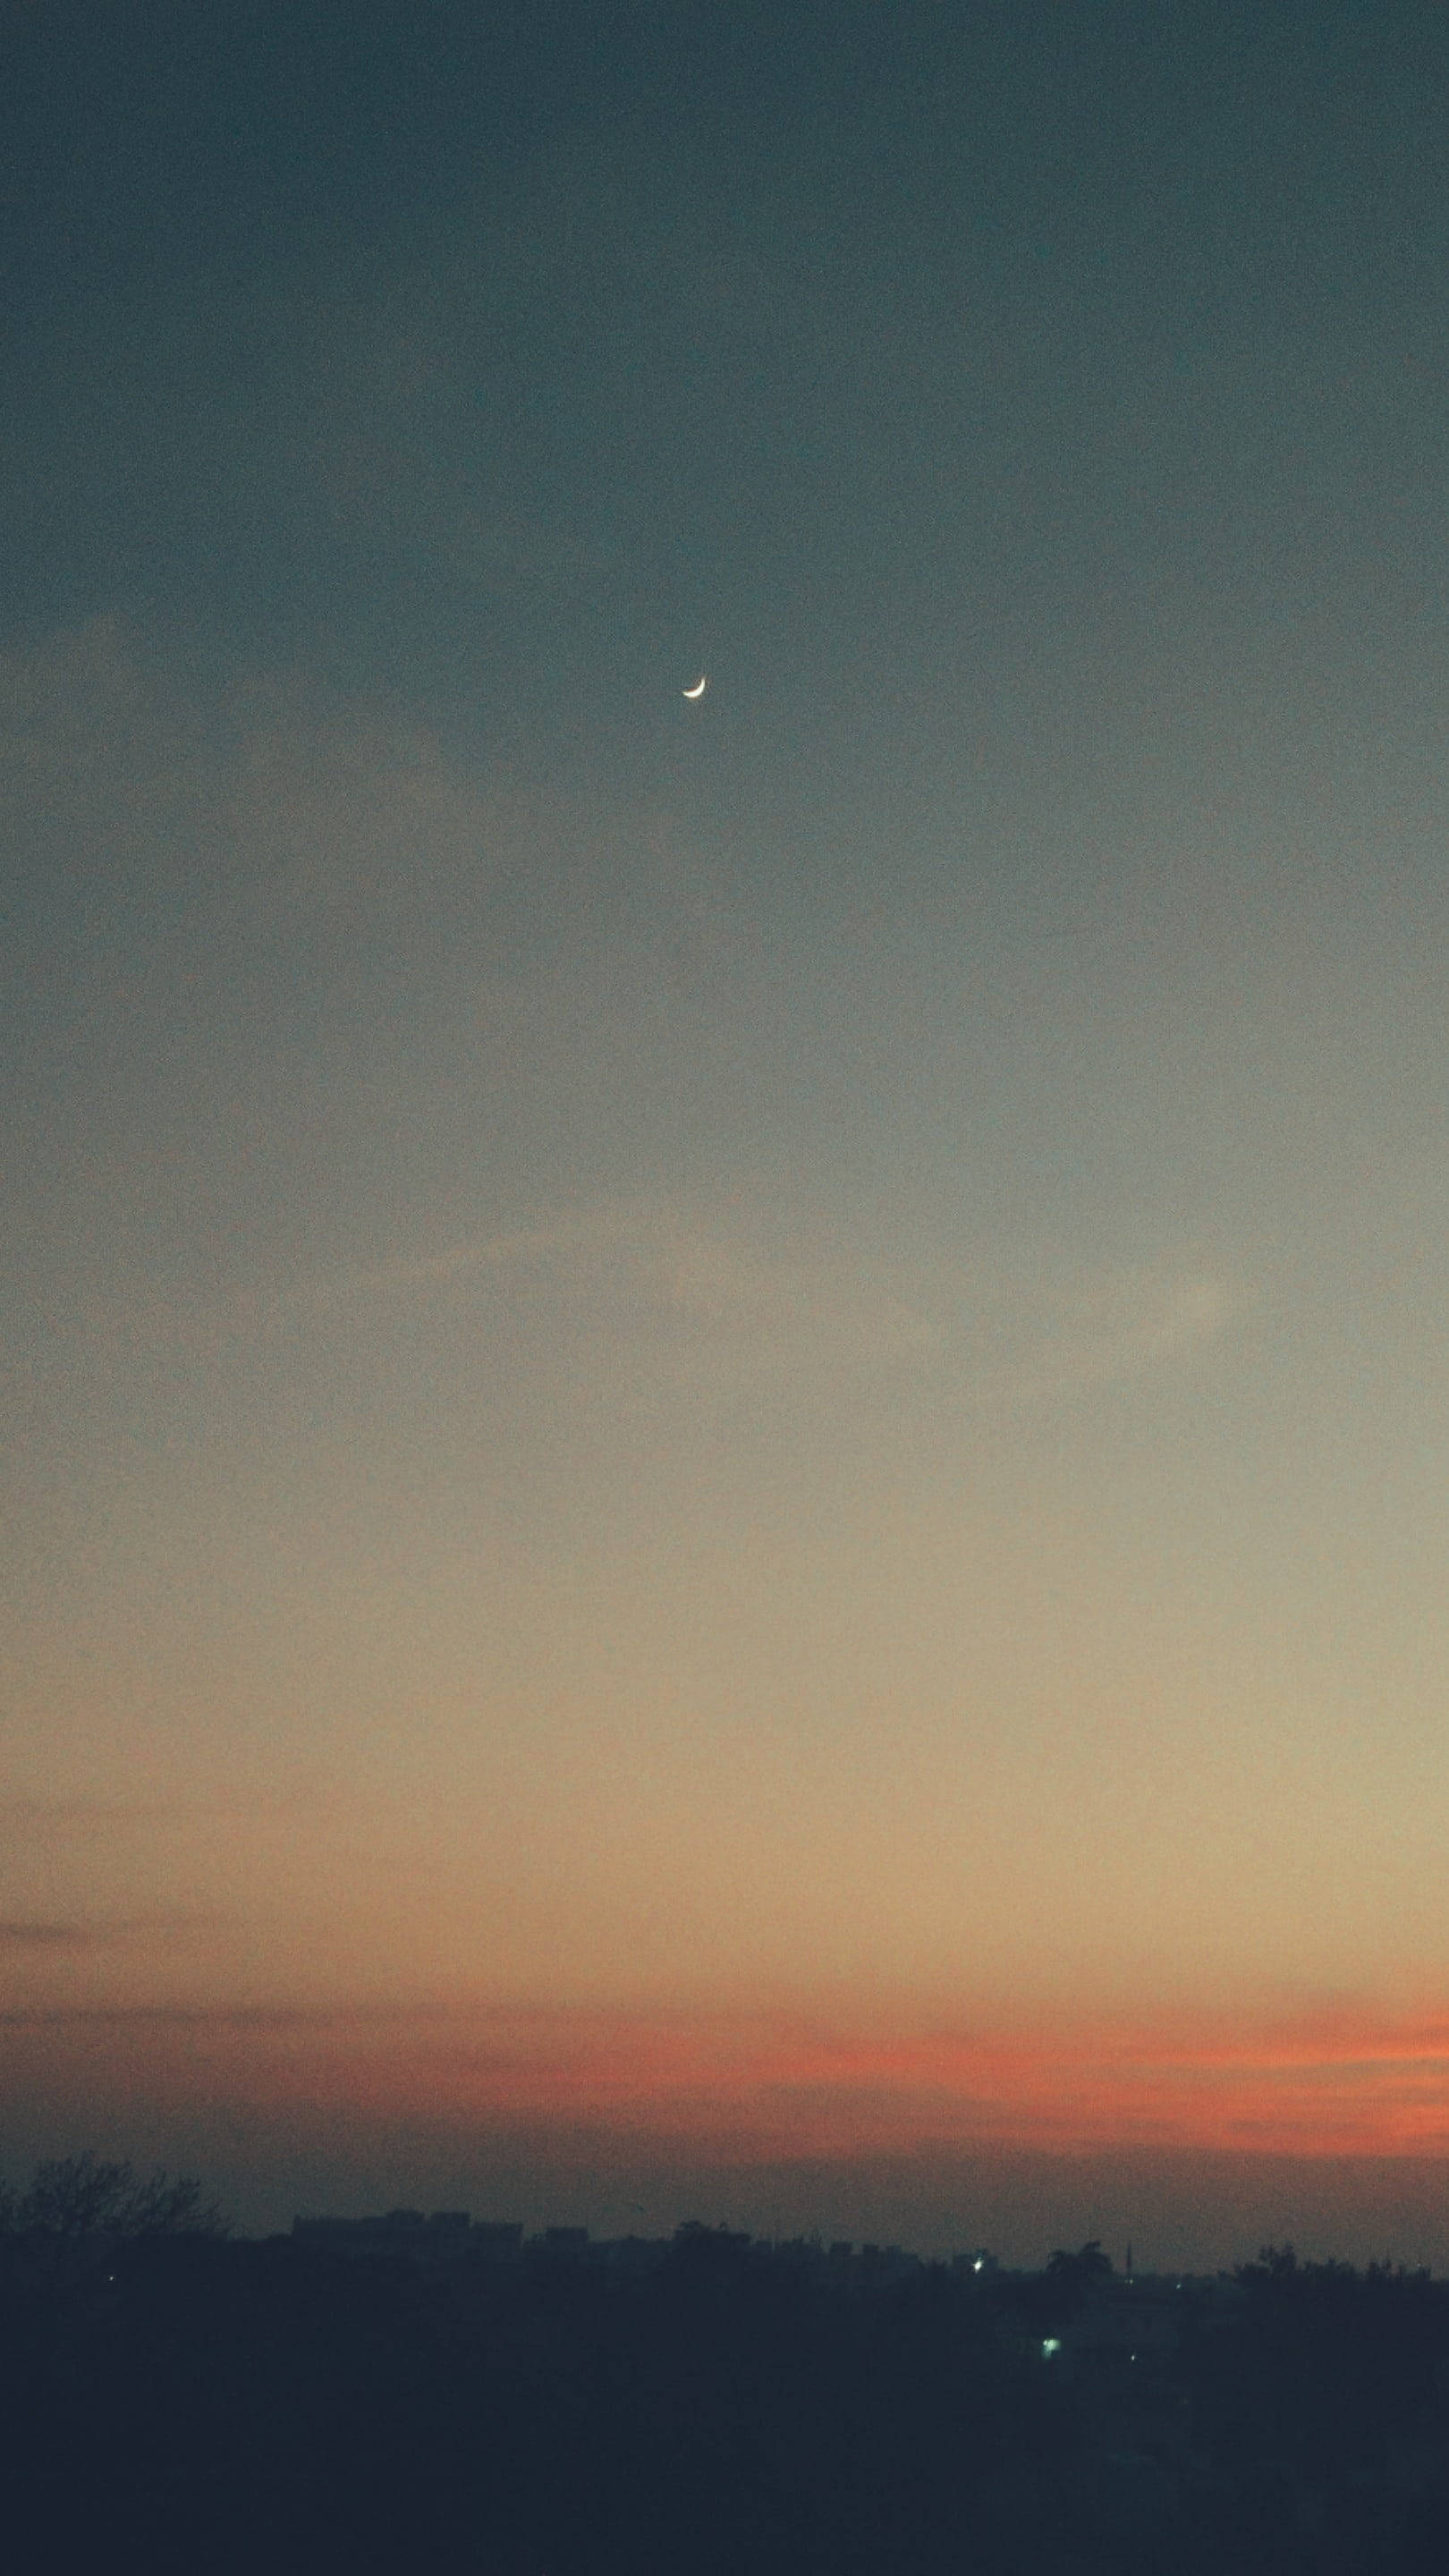 Aesthetic Sunset Sky With Crescent Moon